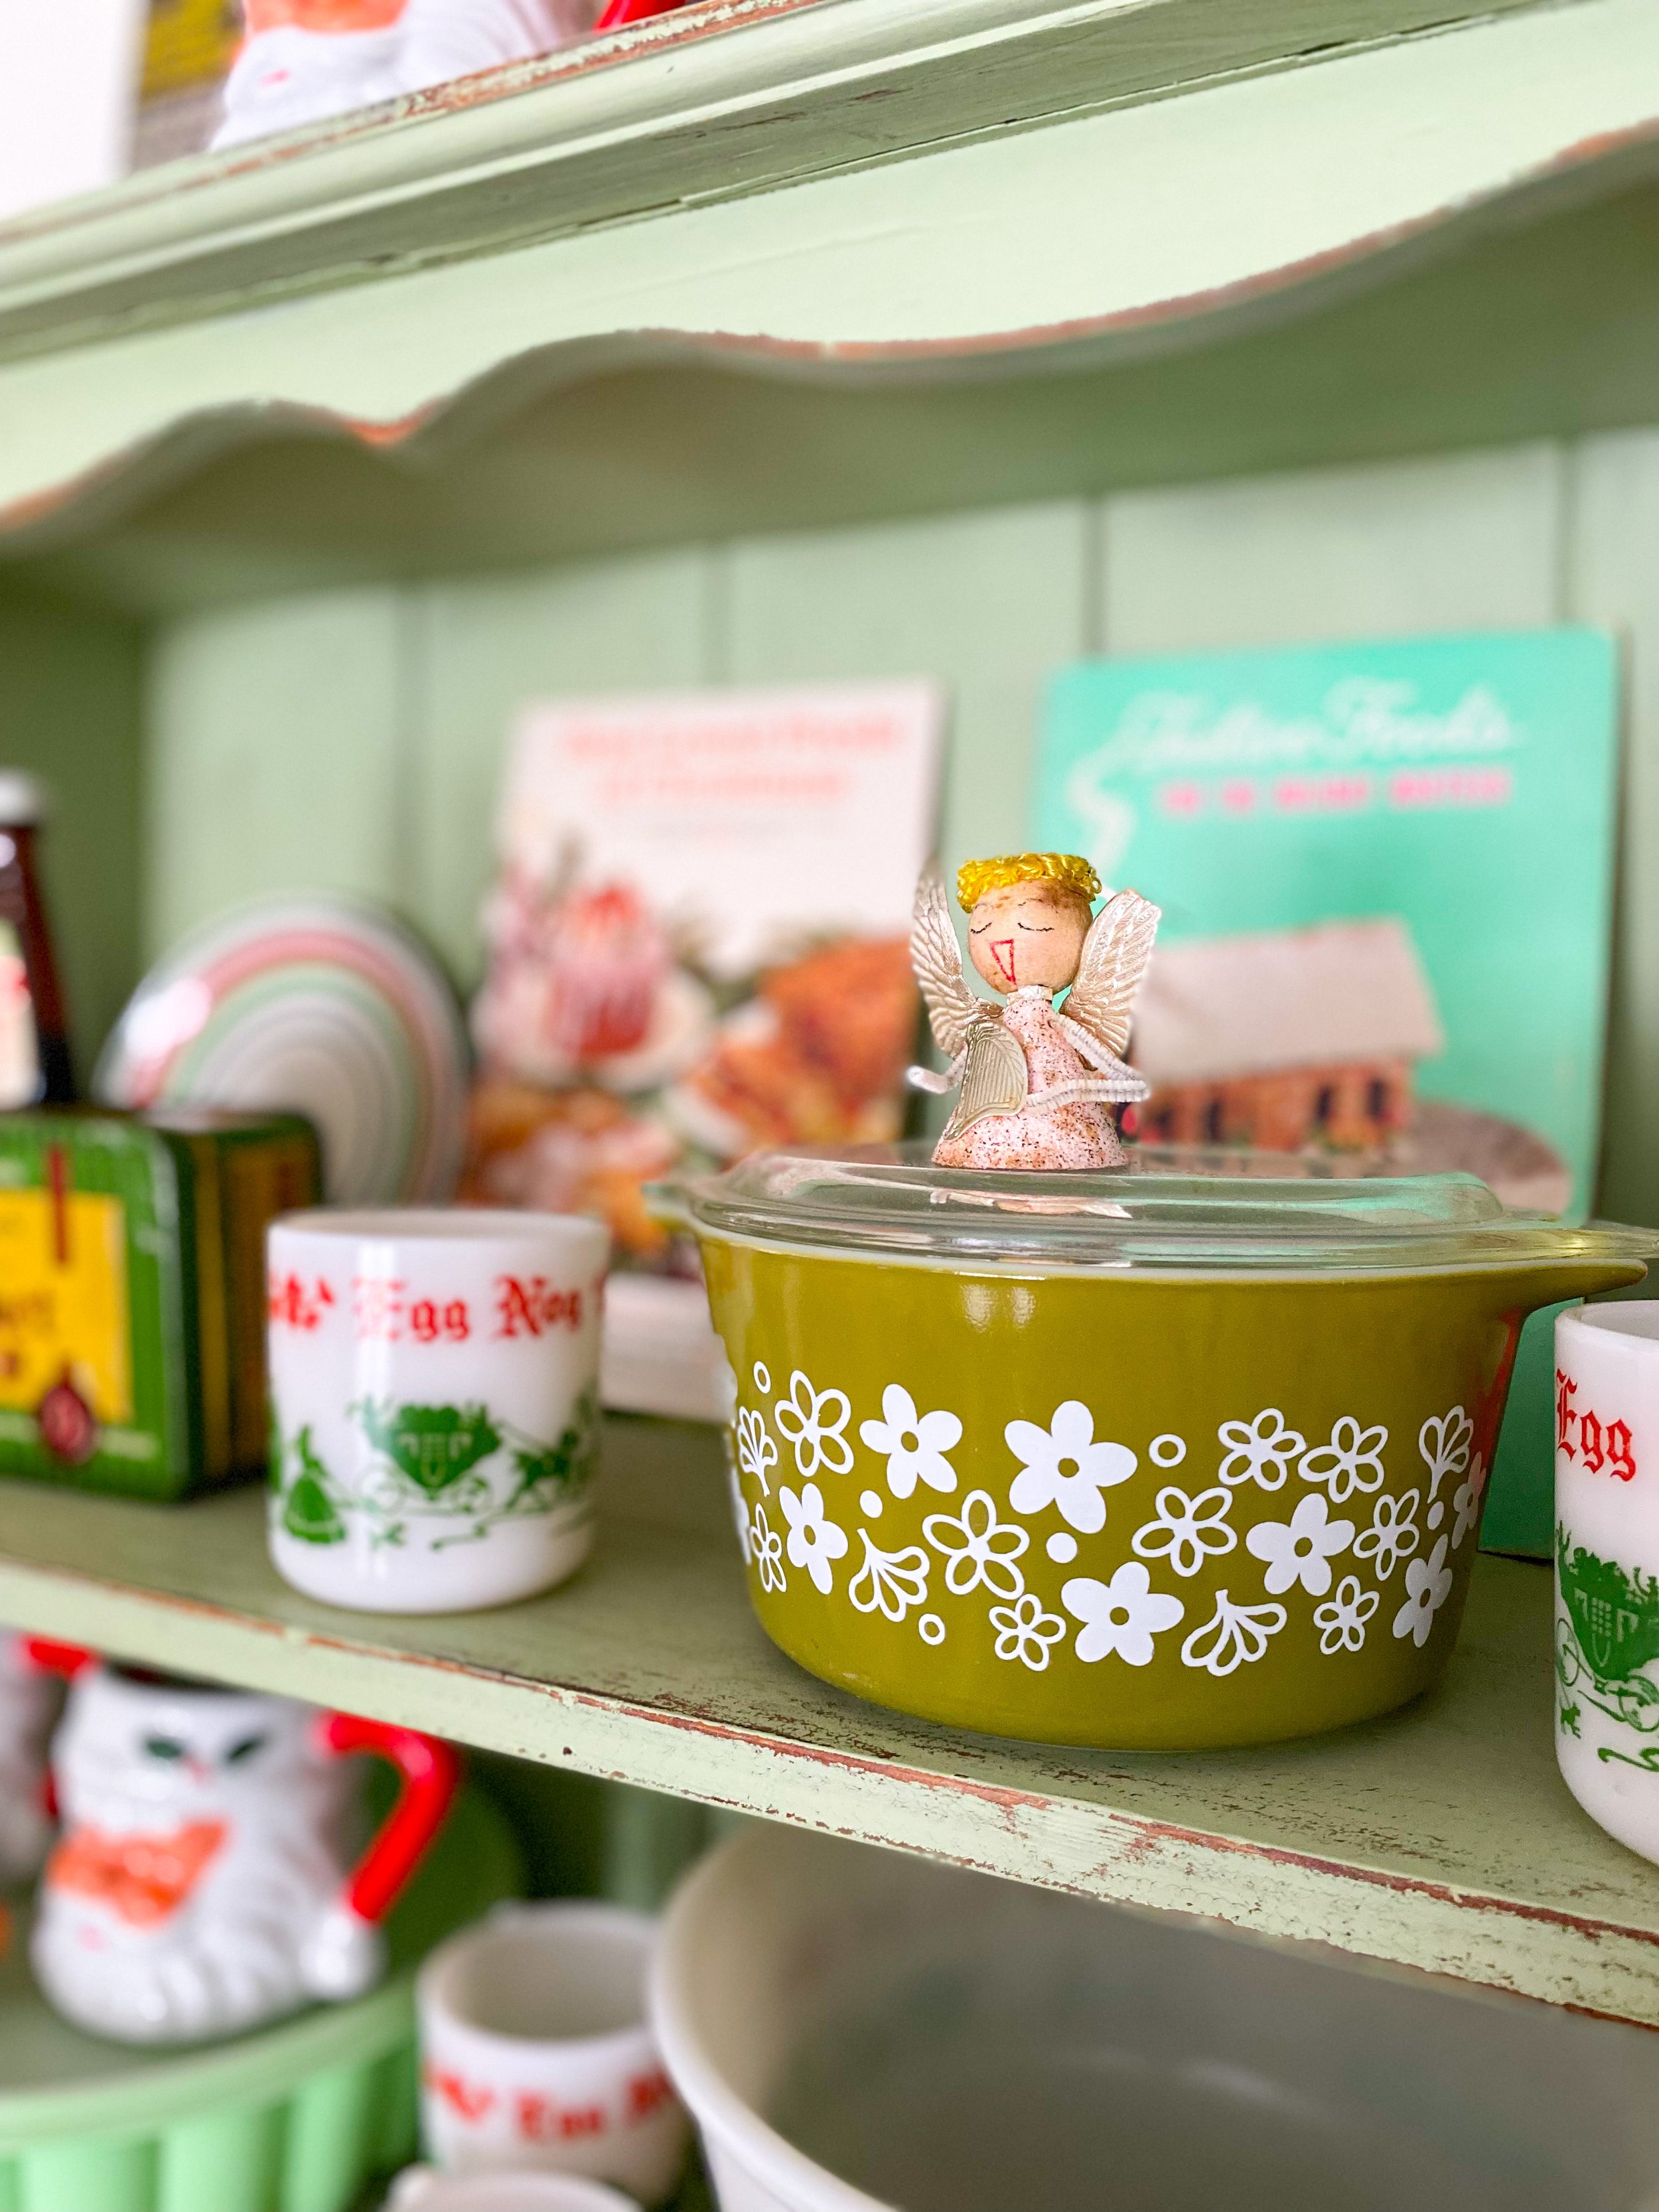 Decorating with vintage Pyrex for Christmas